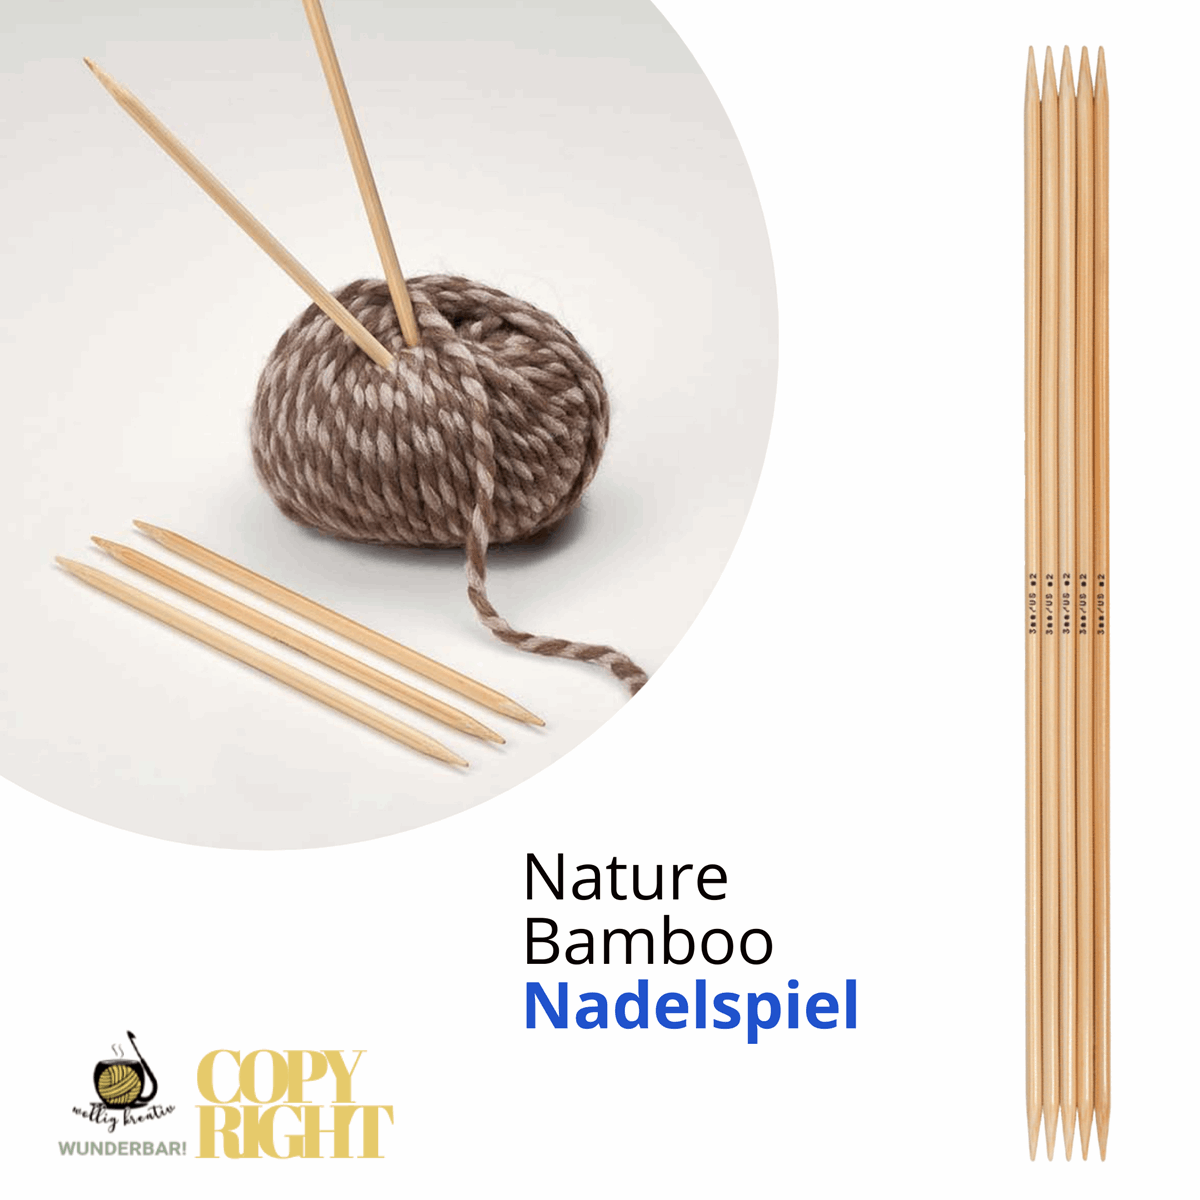 Addi, Nature Bamboo double pointed needles, 65012, size 4 length 15 cm